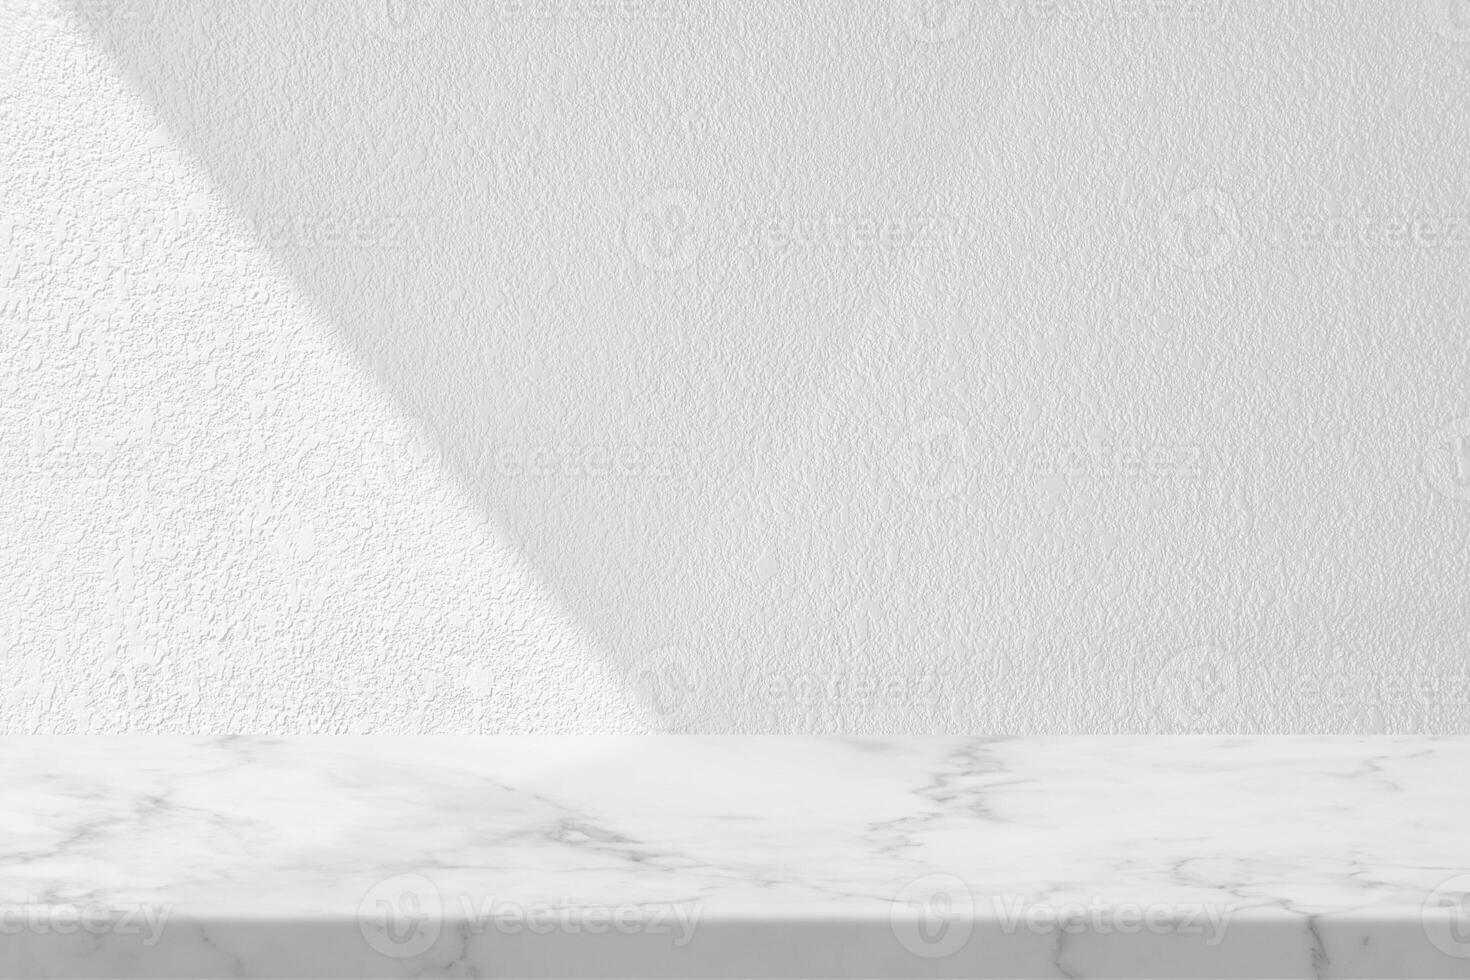 Marble Table with White Stucco Wall Texture Background with Light Beam and Shadow, Suitable for Product Presentation Backdrop, Display, and Mock up. photo